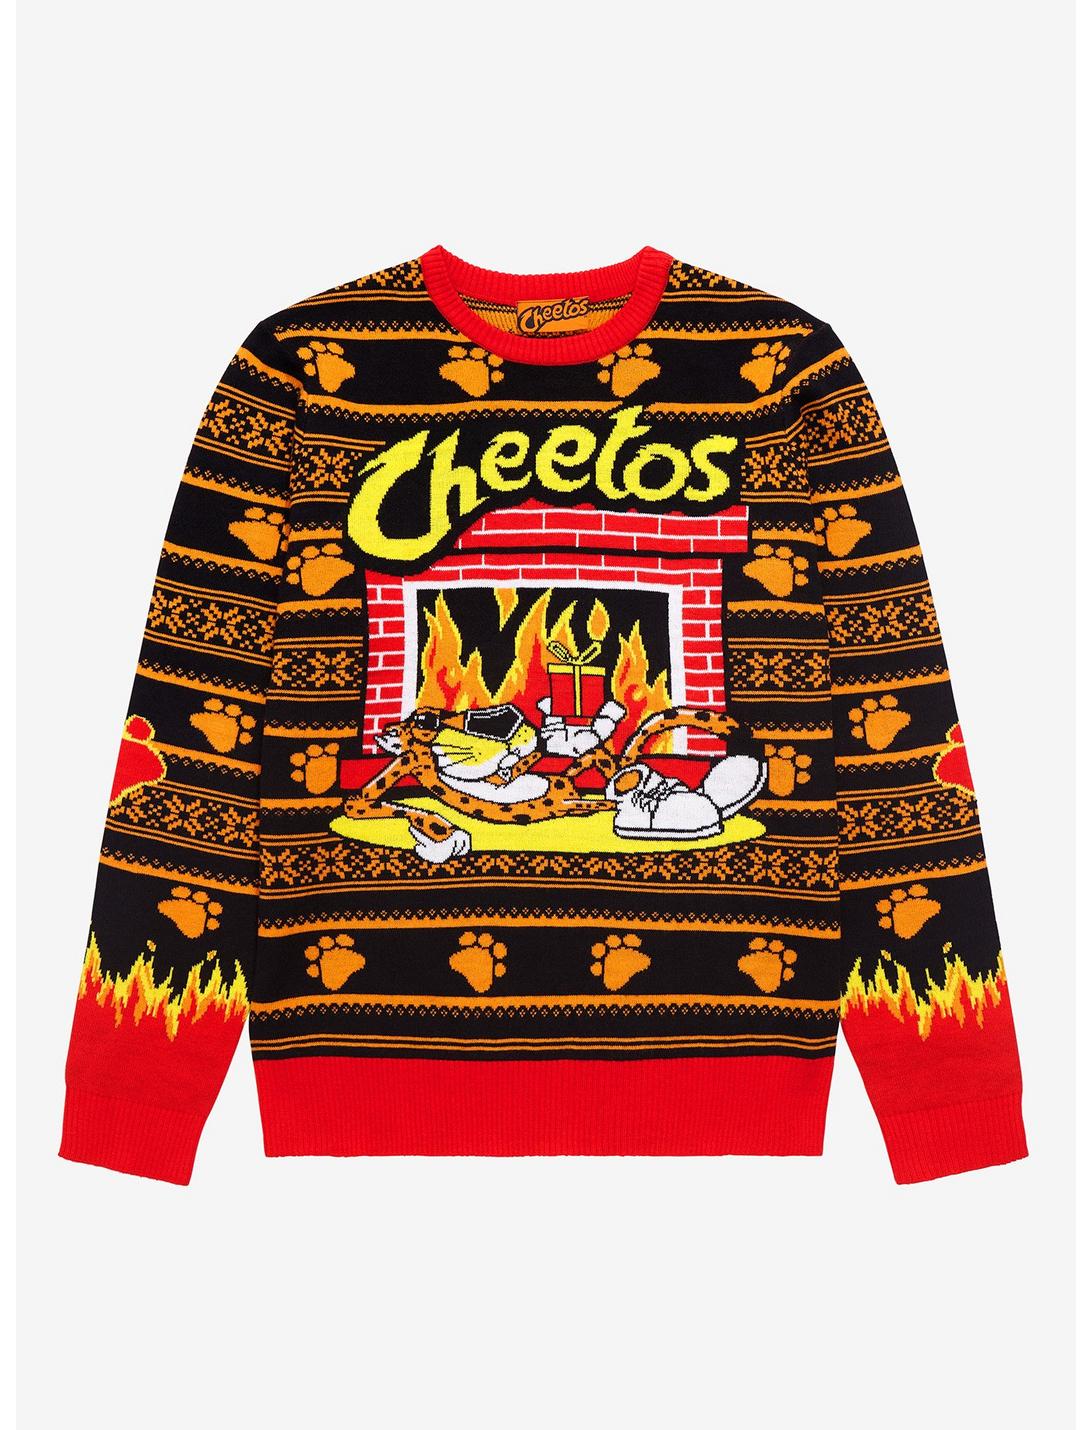 Cheetos Chester Cheetah Fireplace Holiday Sweater - BoxLunch Exclusive, MULTI, hi-res